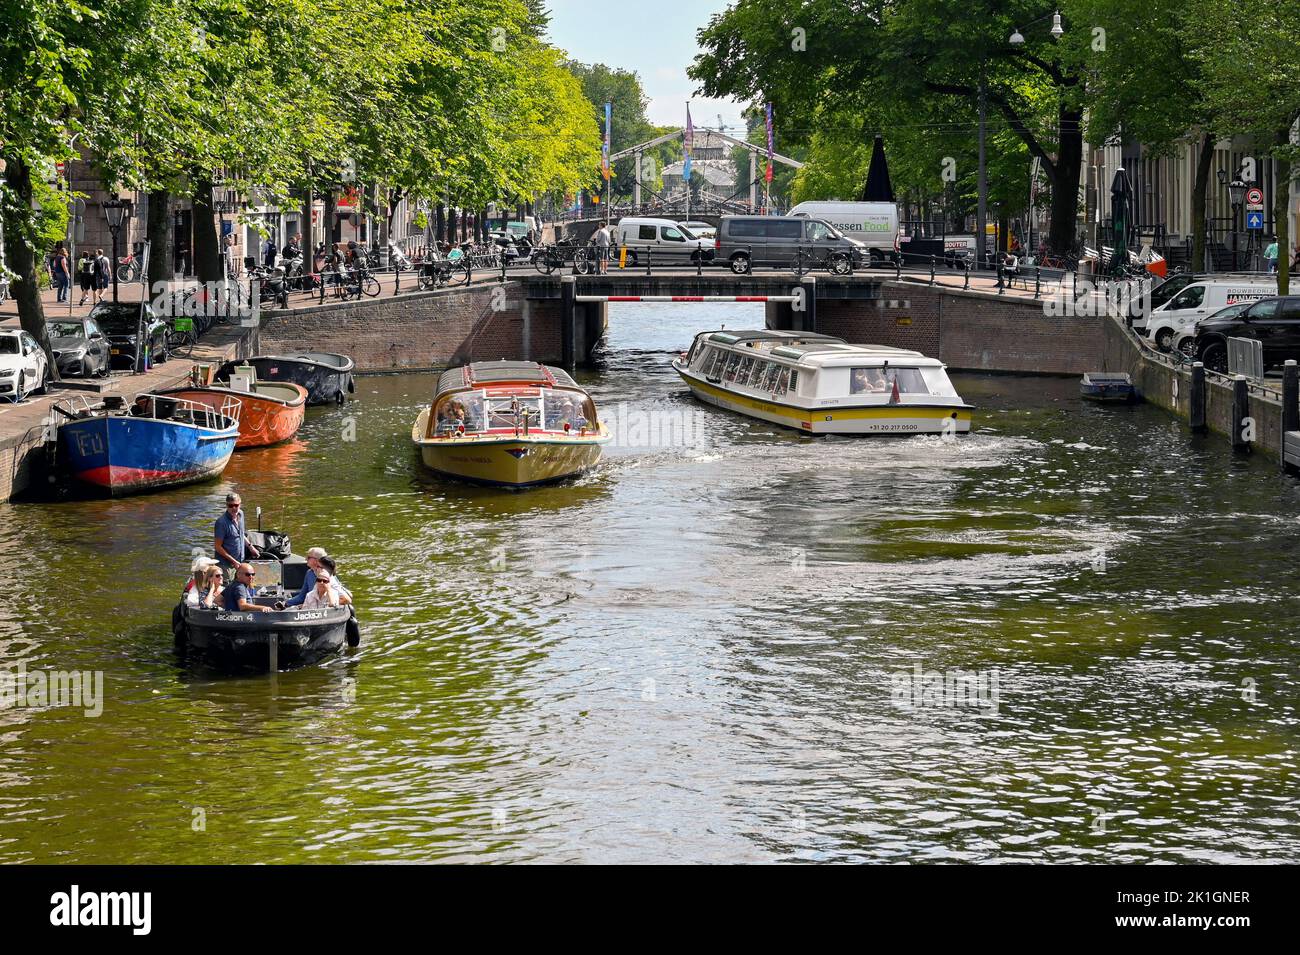 Amsterdam, Netherlands - August 2022: Small motor boat and sightseeing boats on a canal in the city centre Stock Photo